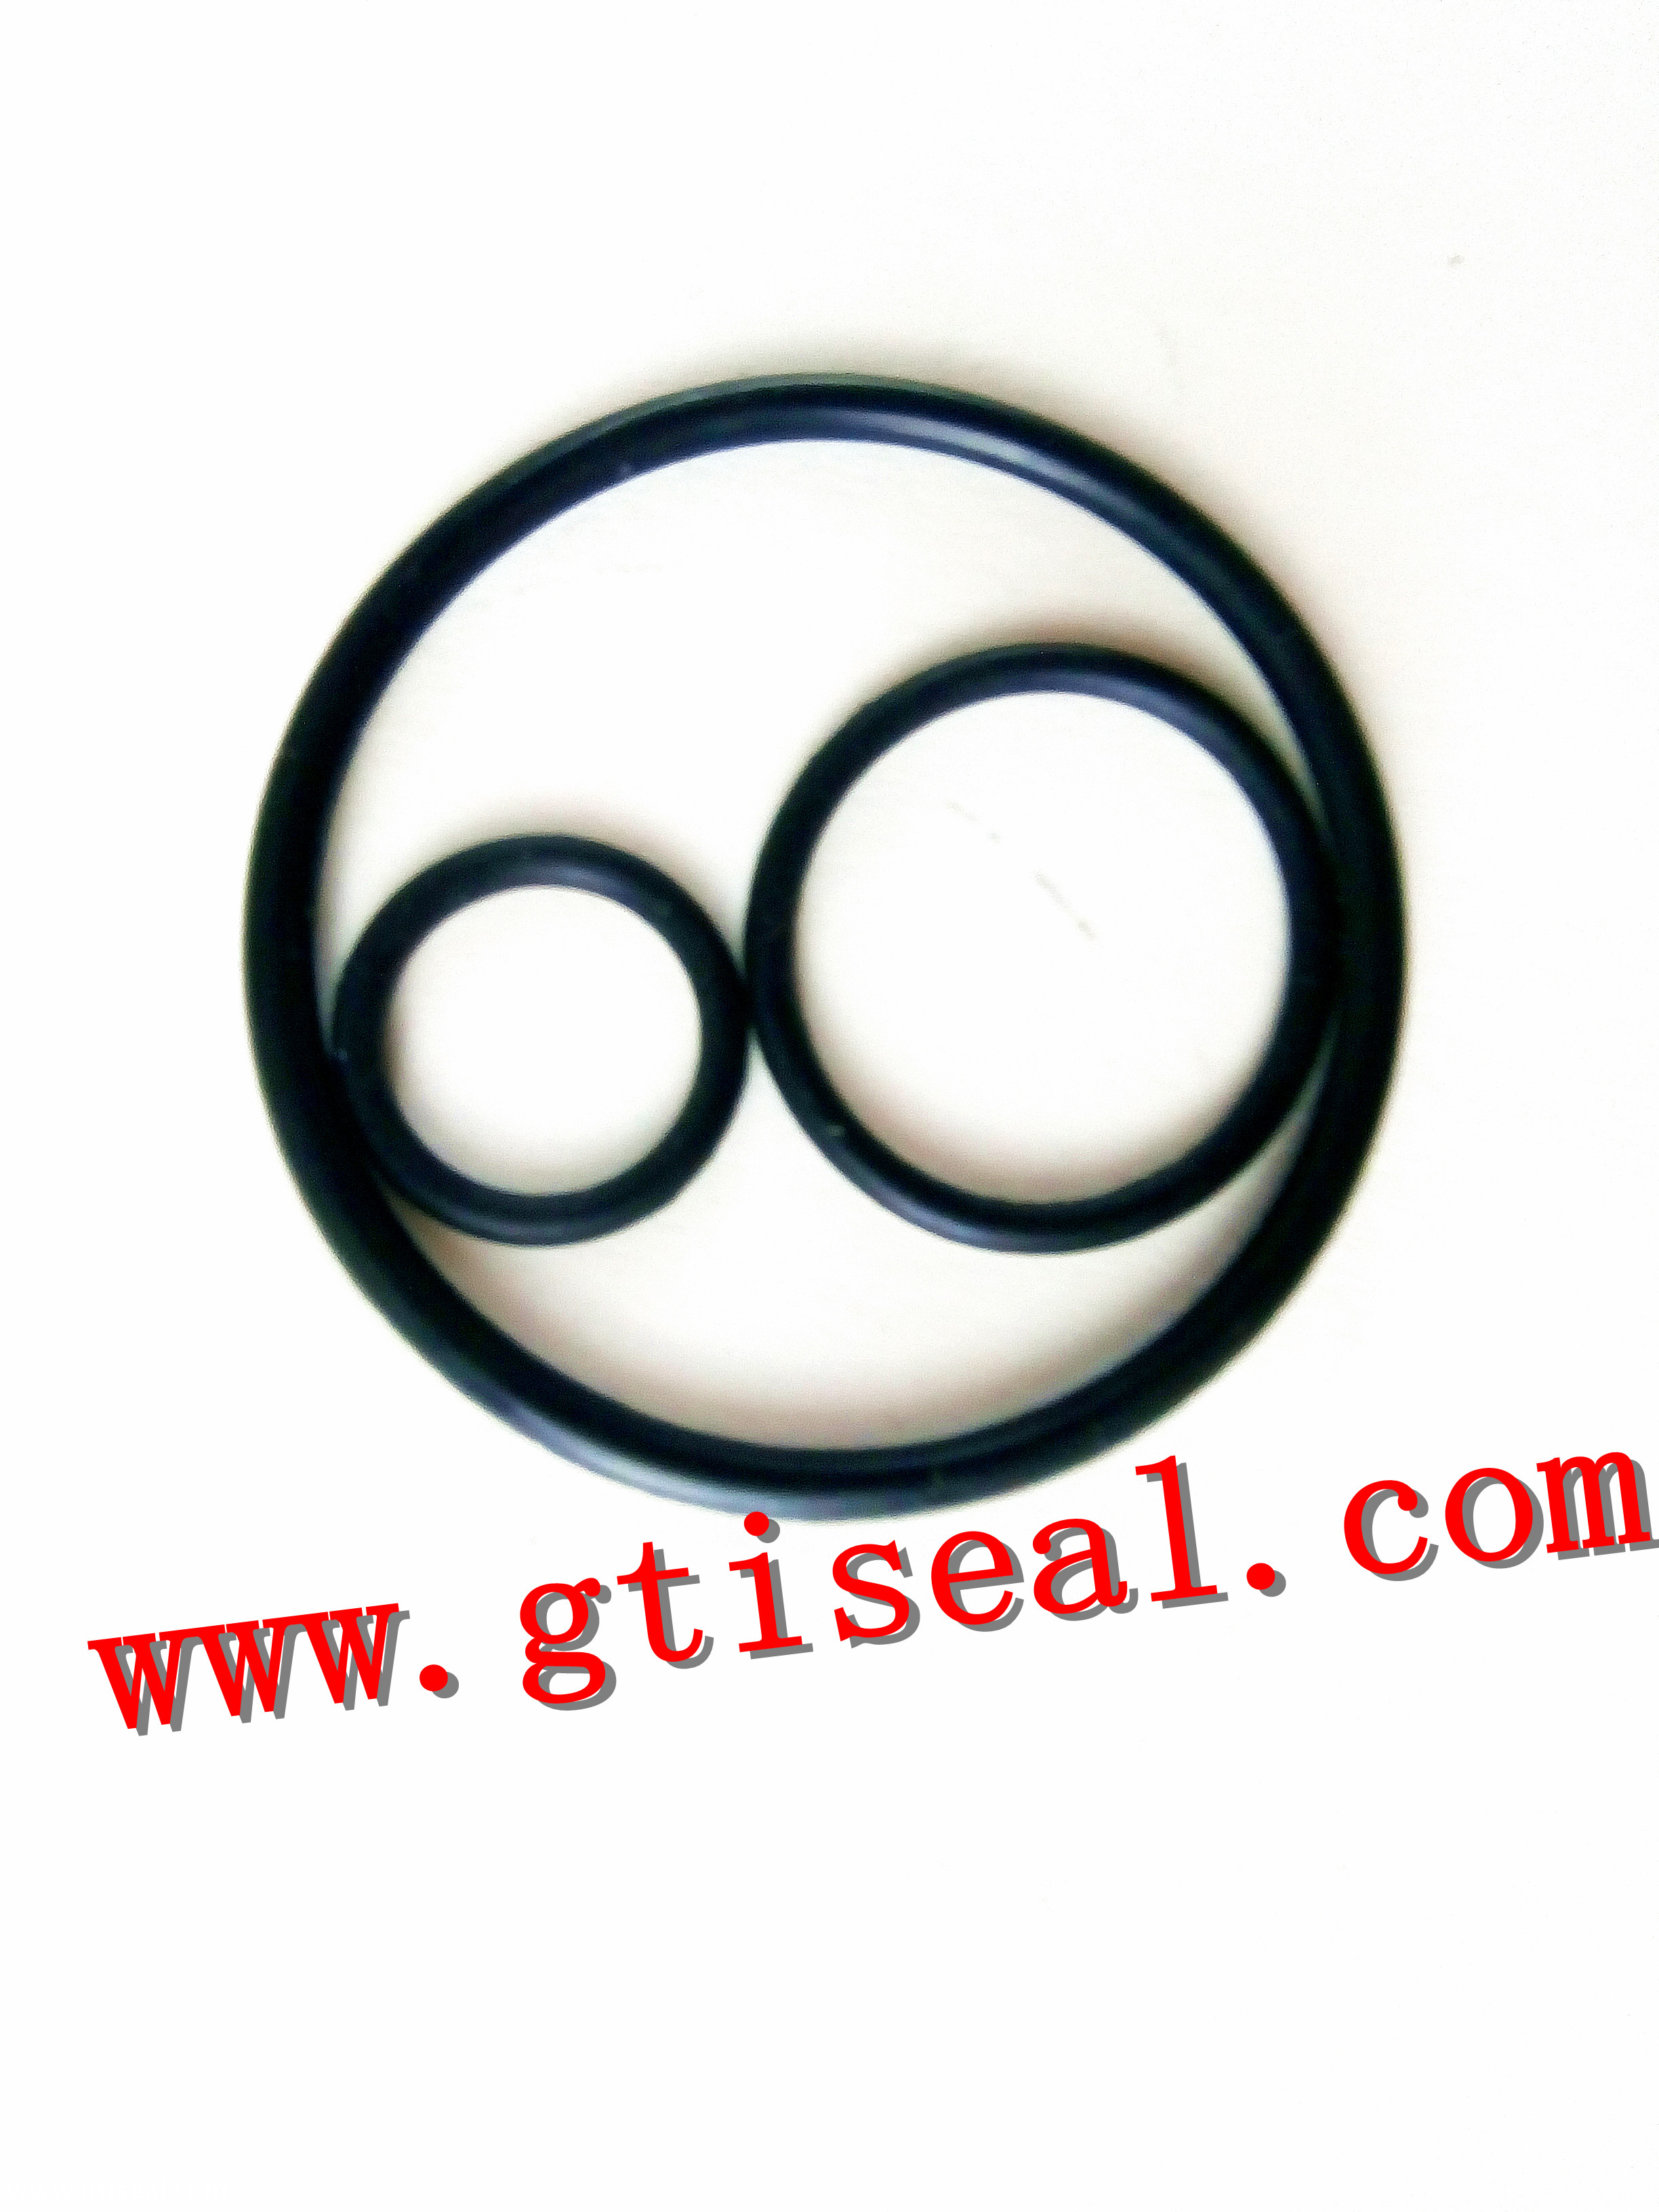 Rubber seal oil resistance o ring standard different sizes rubber o rings